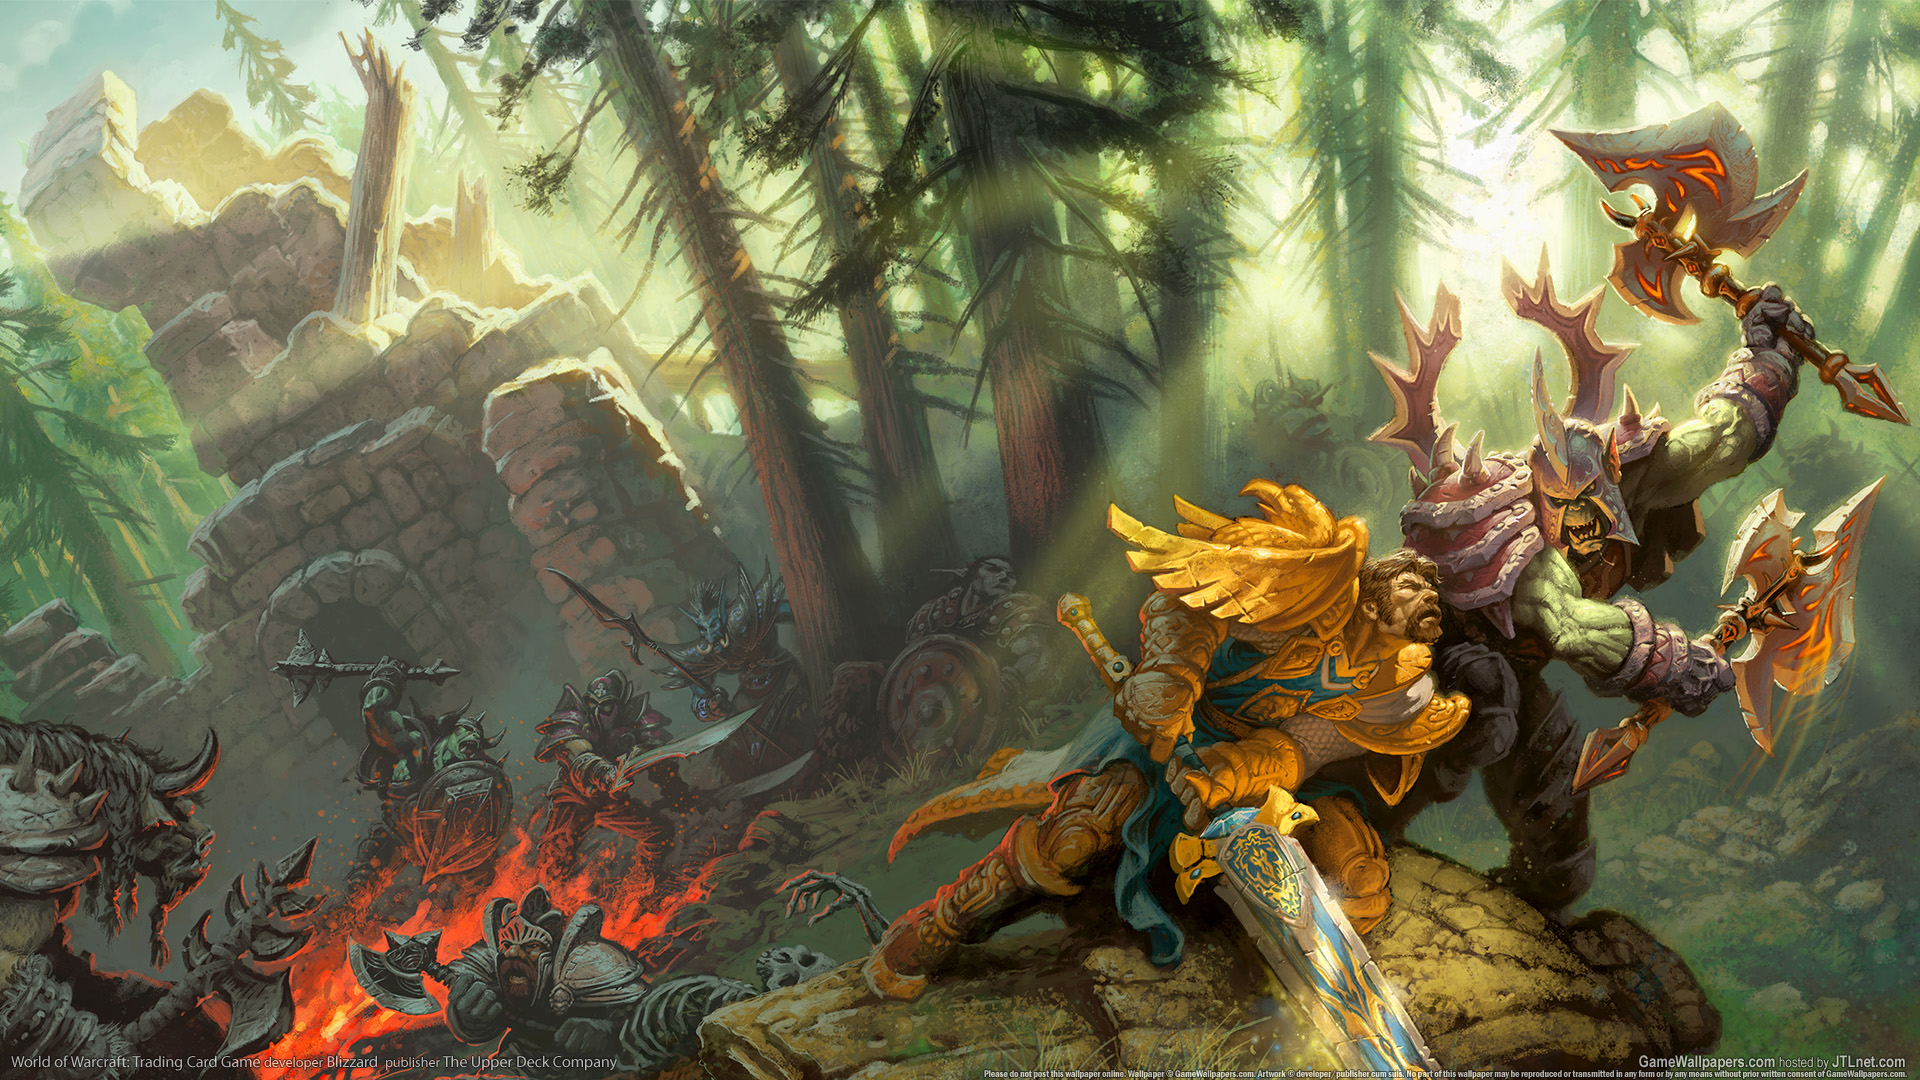 High Resolution Wallpaper | World Of Warcraft: Trading Card Game 1920x1080 px